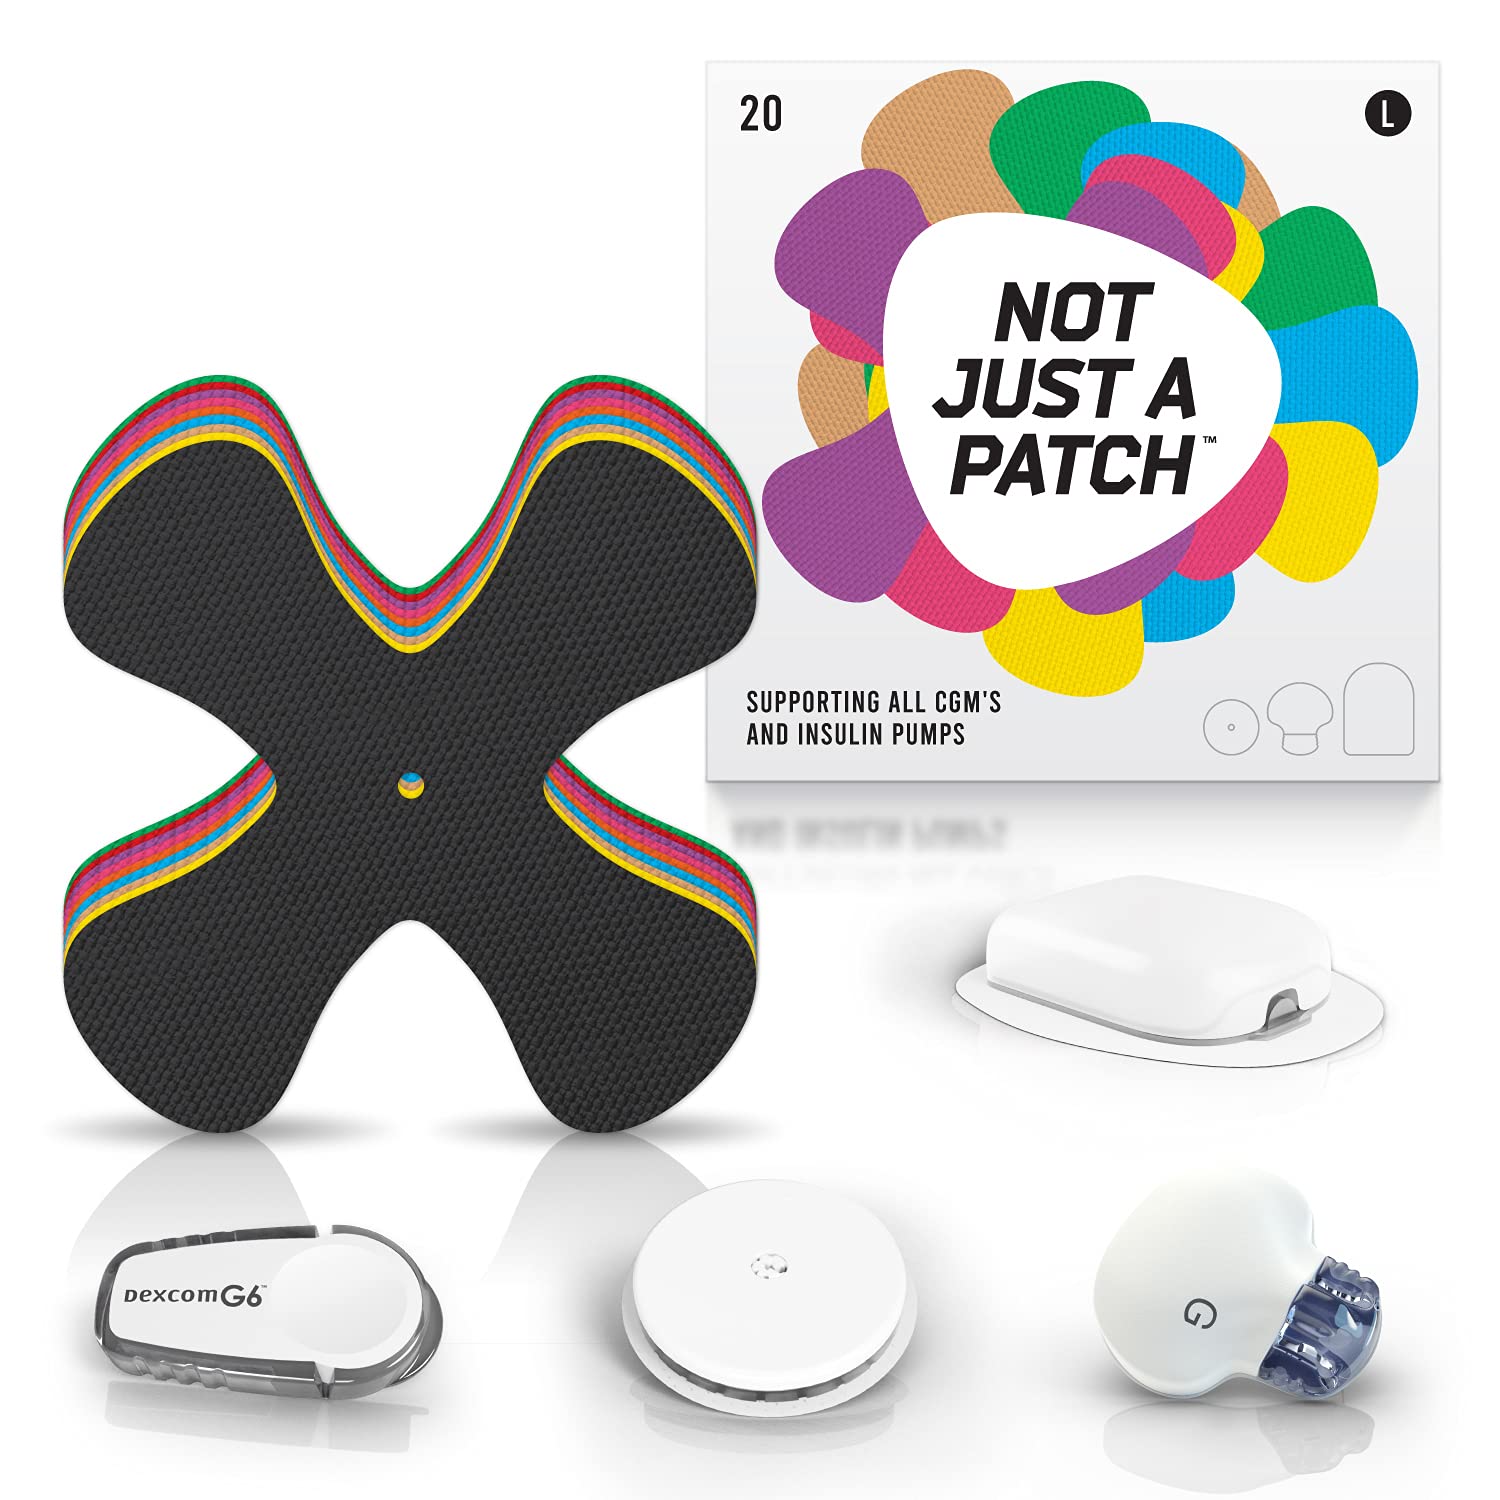 Not Just A Patch Freestyle Libre 2 Sensor Covers (20 Pack) CGM Sensor  Patches for Freestyle Libre 2 - Water Resistant & Durable for 10-14 Days 